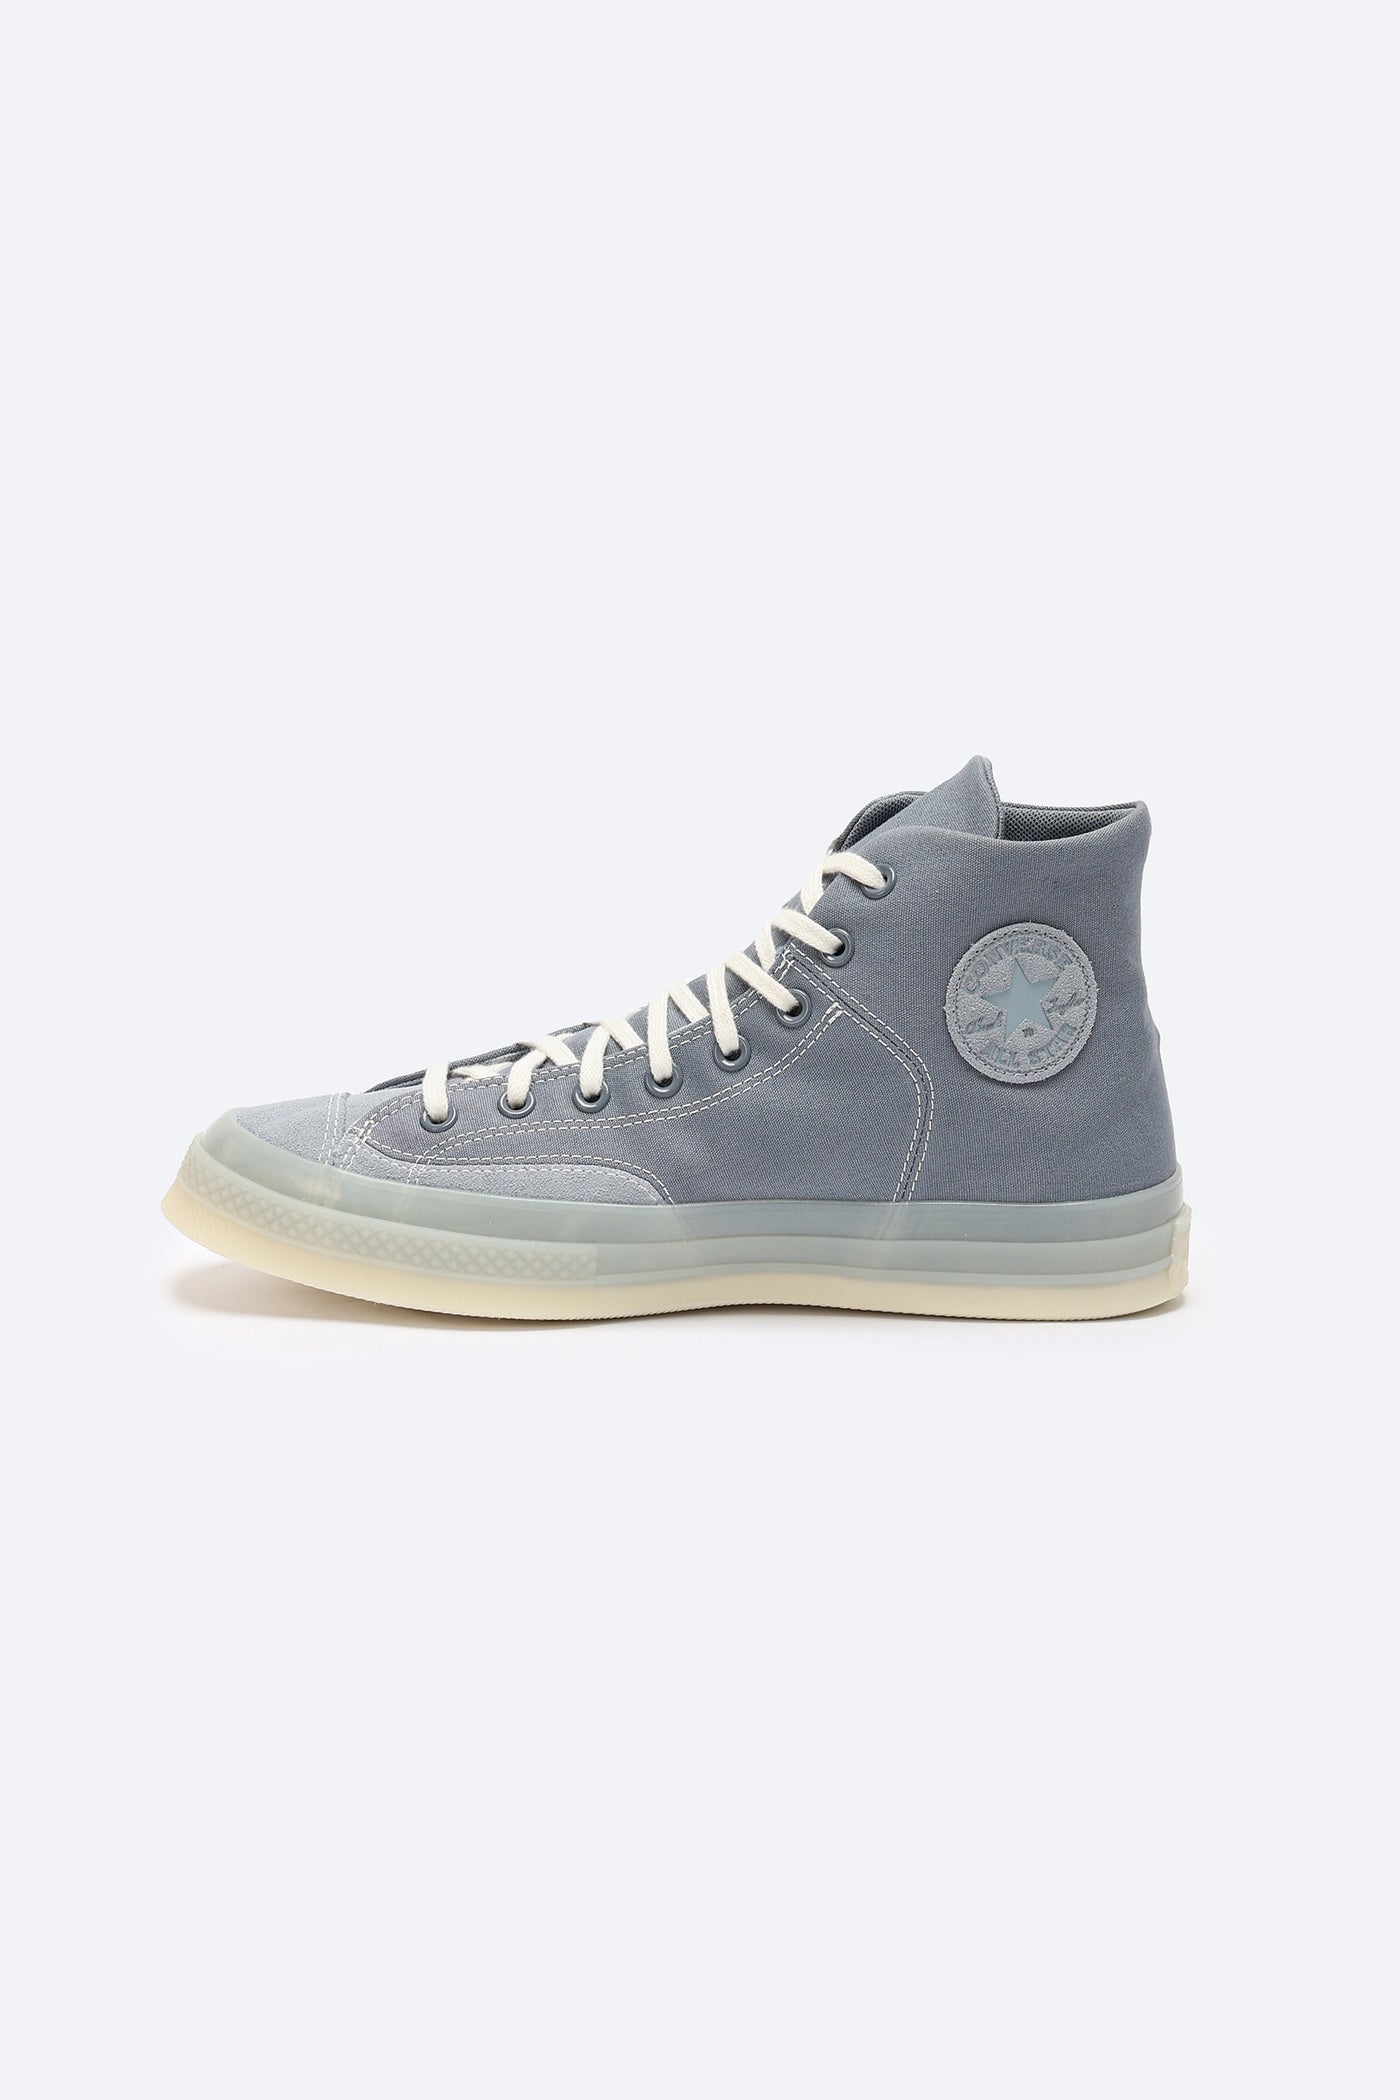 Sneakers - ChucK 70 Marquis  - Cruise High